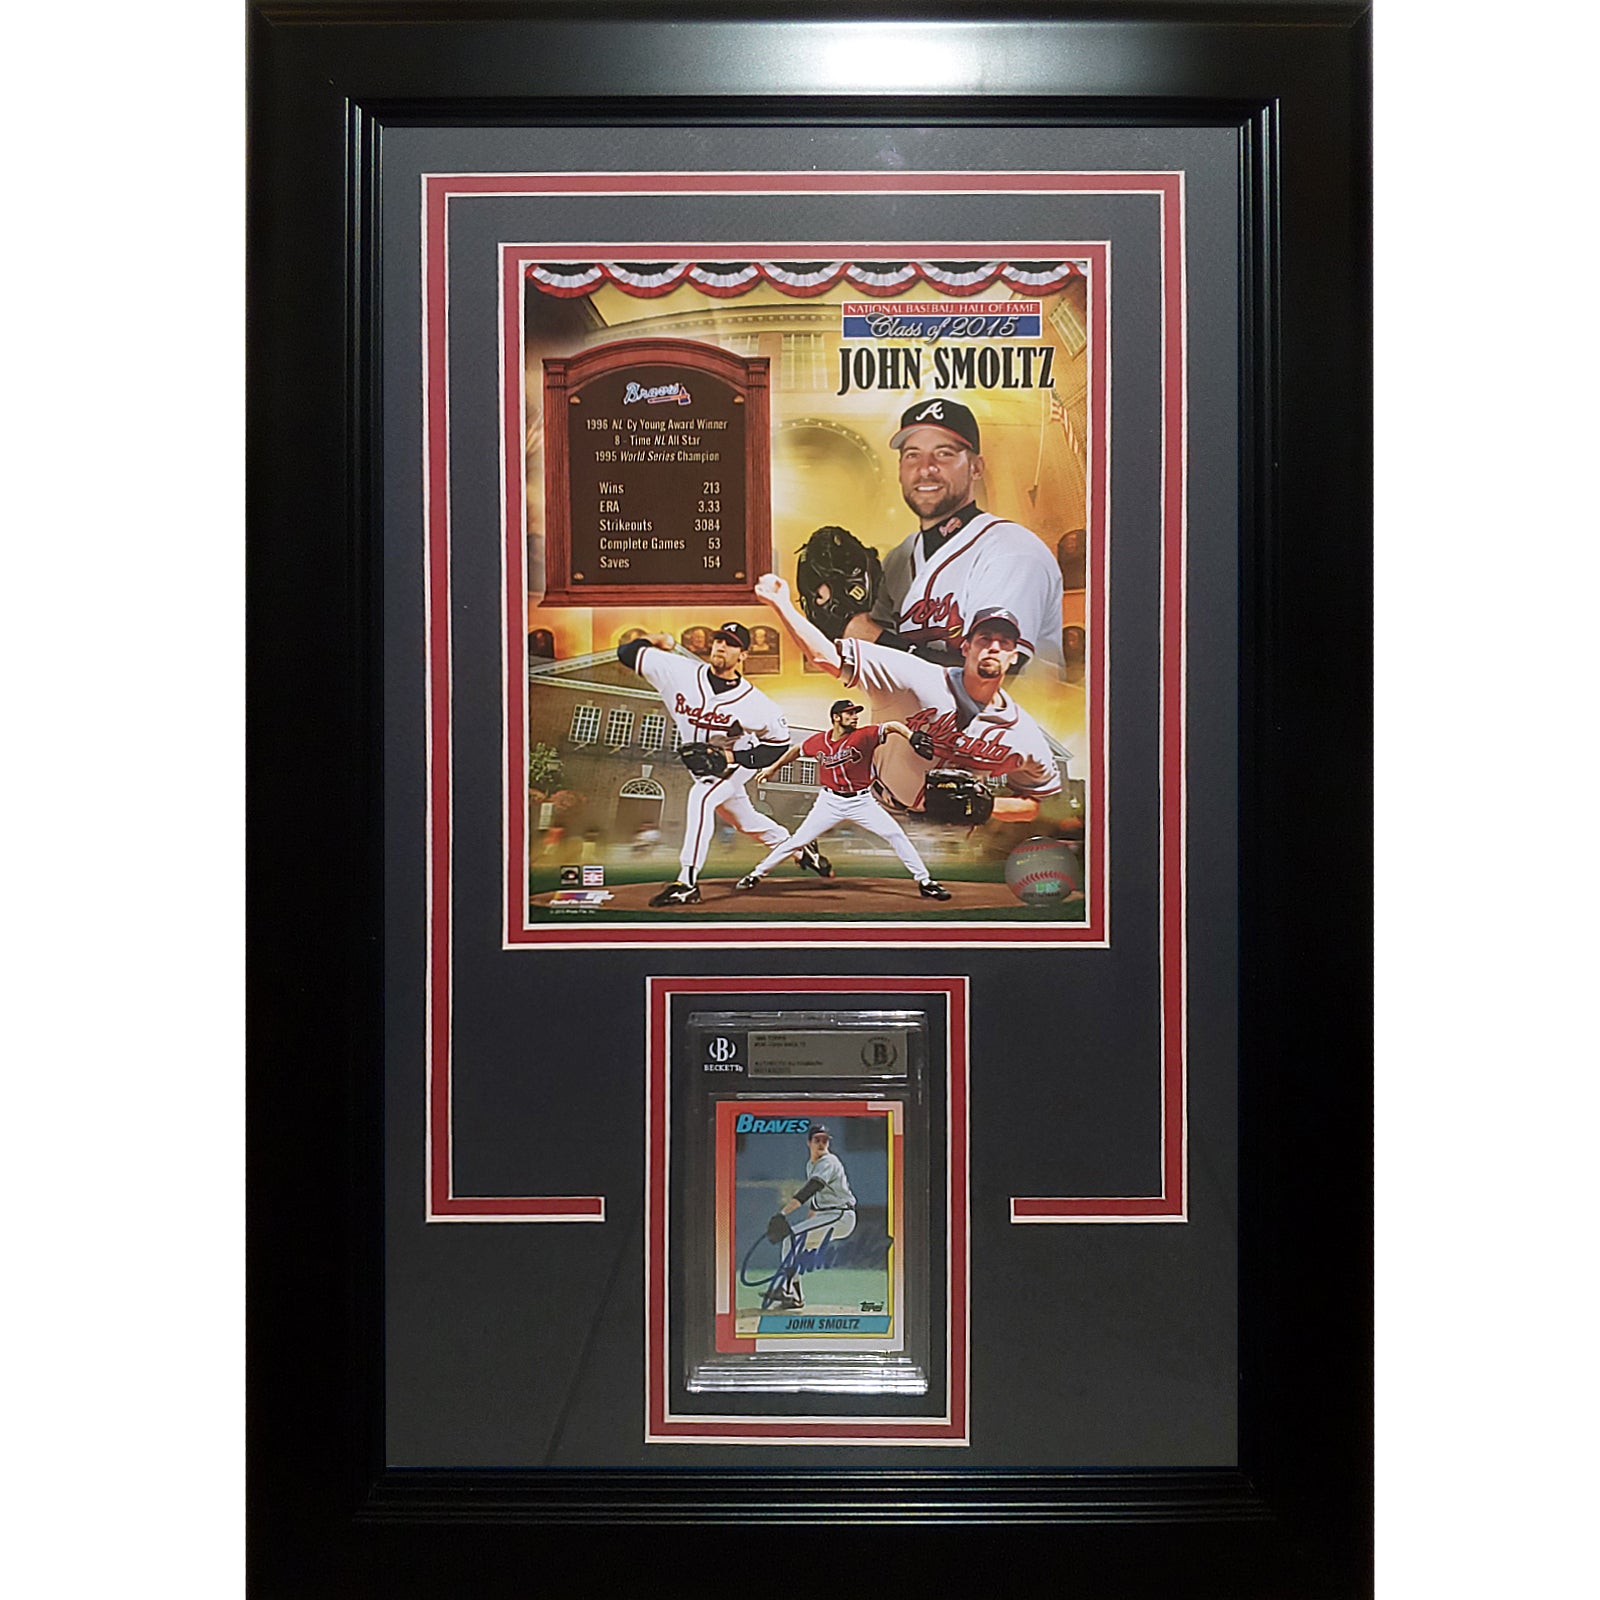 John Smoltz Autographed White Braves Jersey - Beautifully Matted and Framed  - Hand Signed By John Smoltz and Certified Authentic by JSA COA - Includes